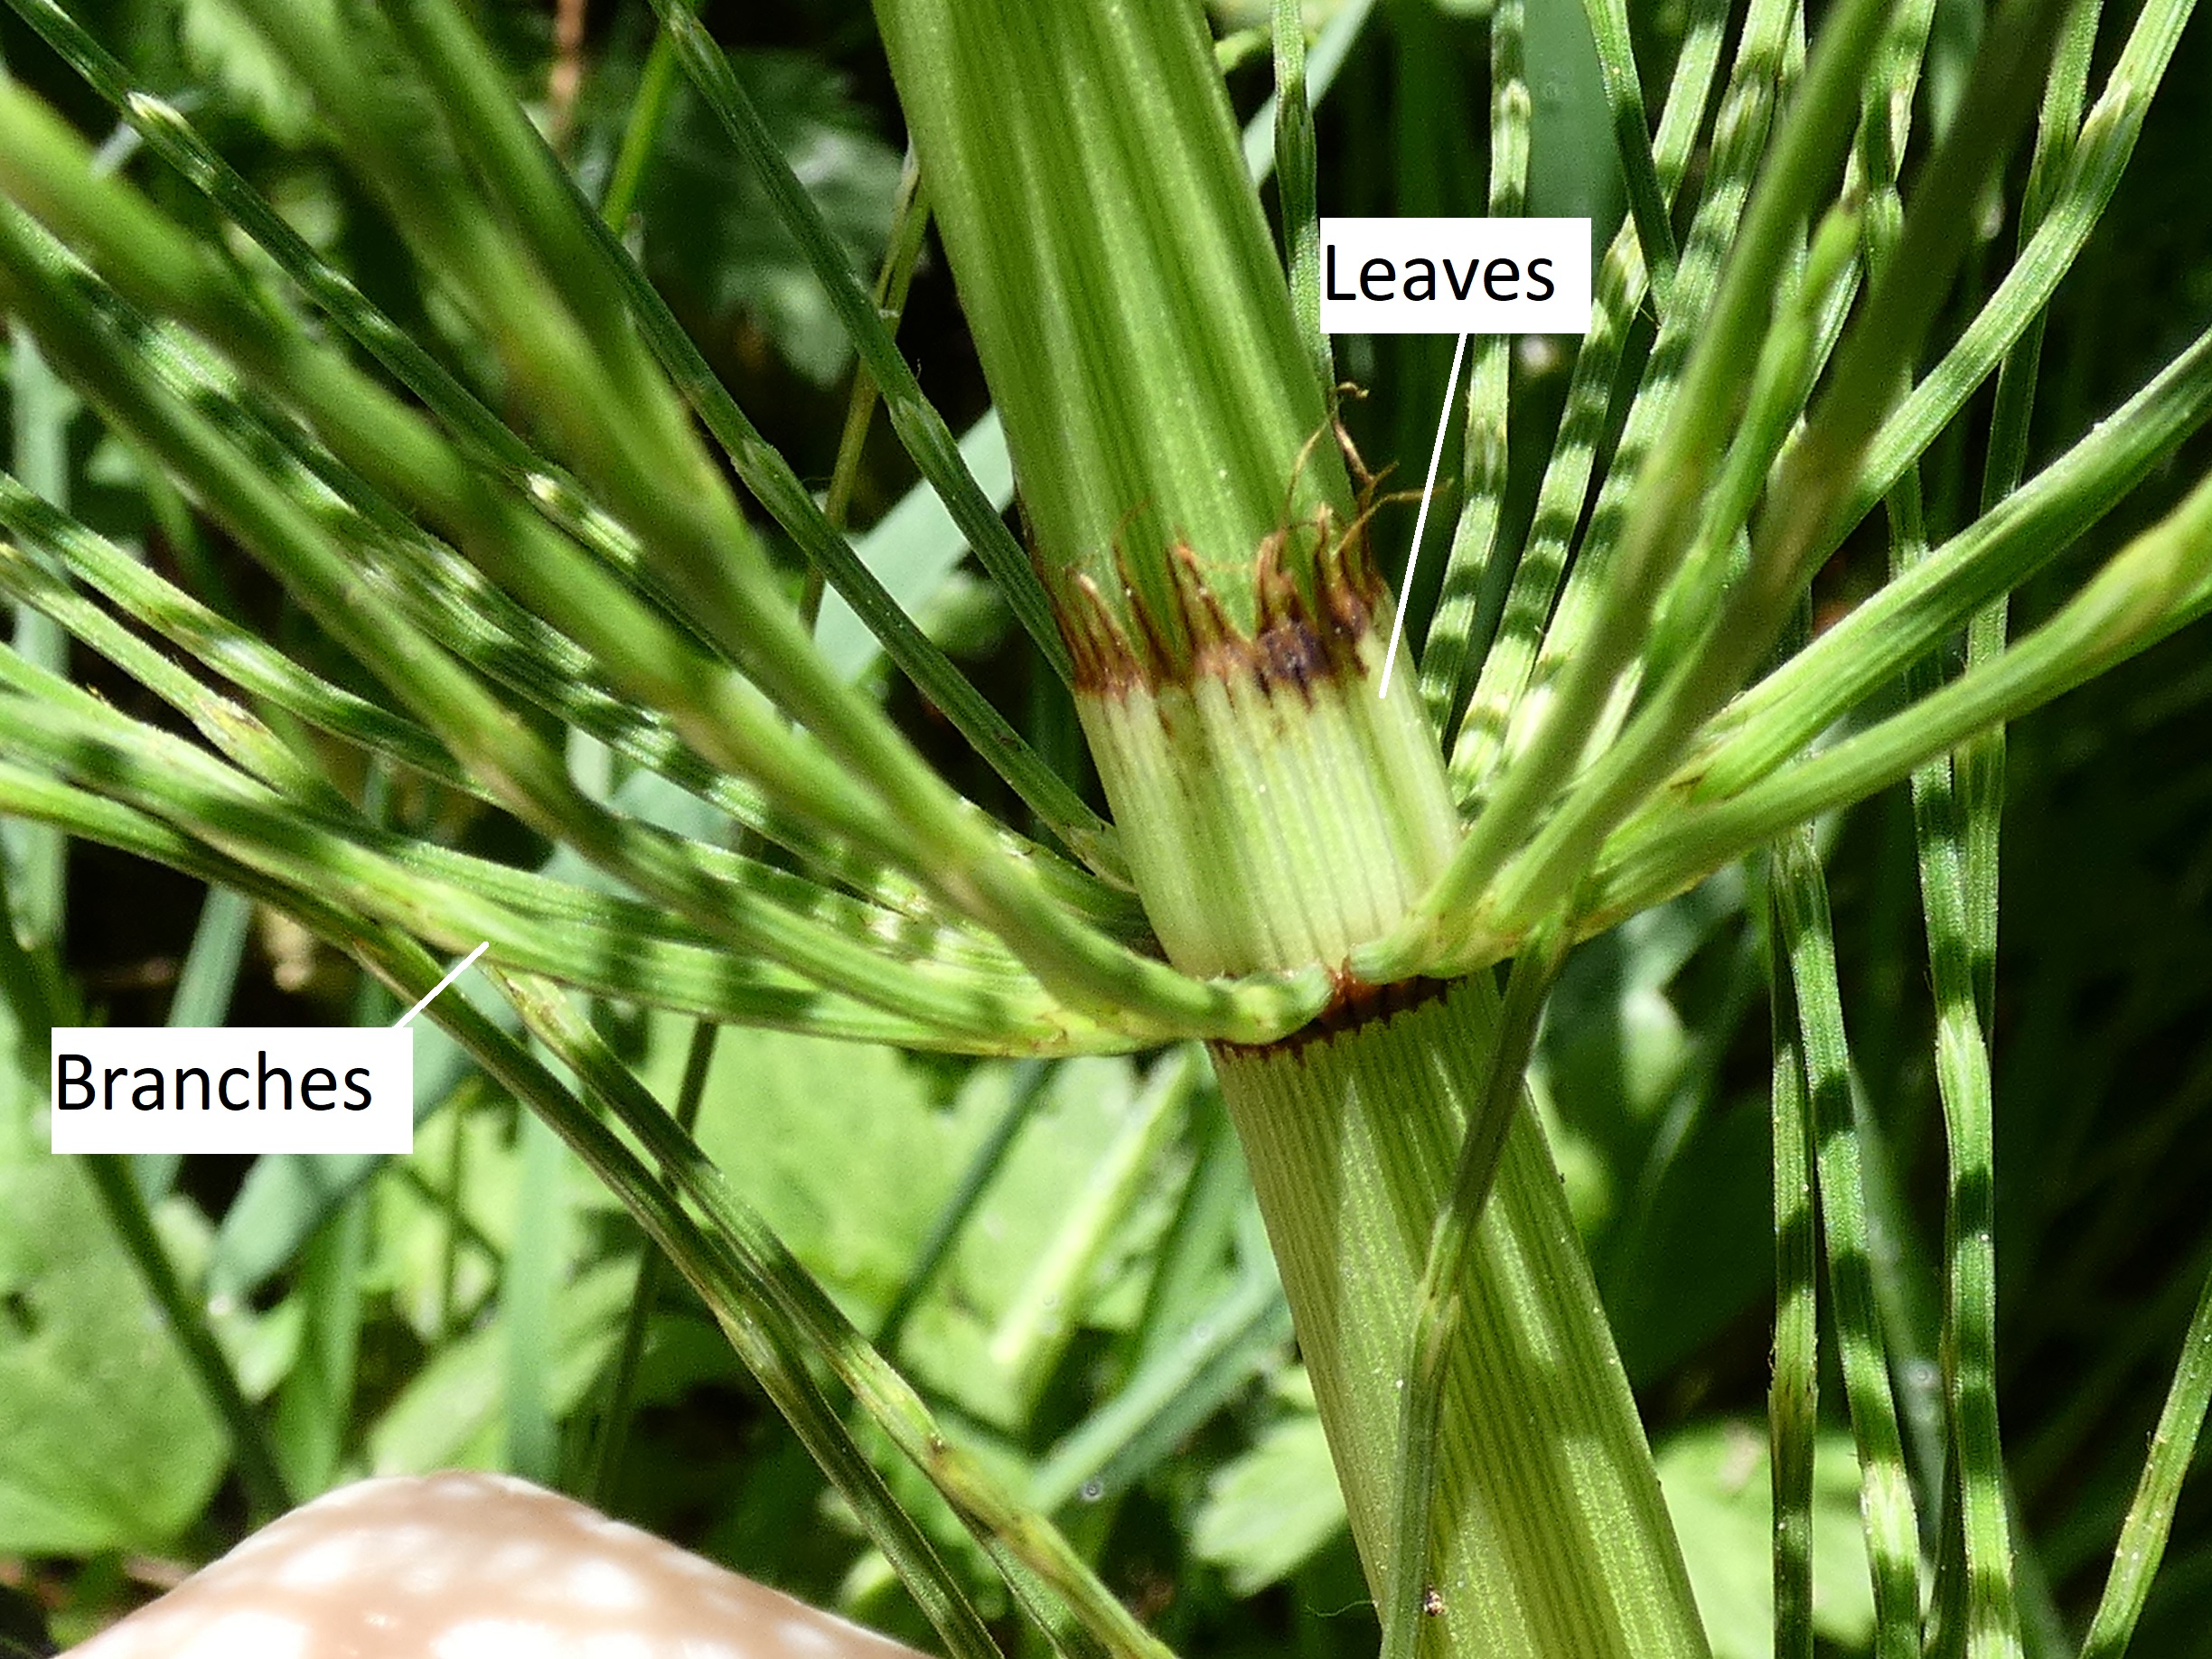 A closer image showing Equisetum leaves and branches